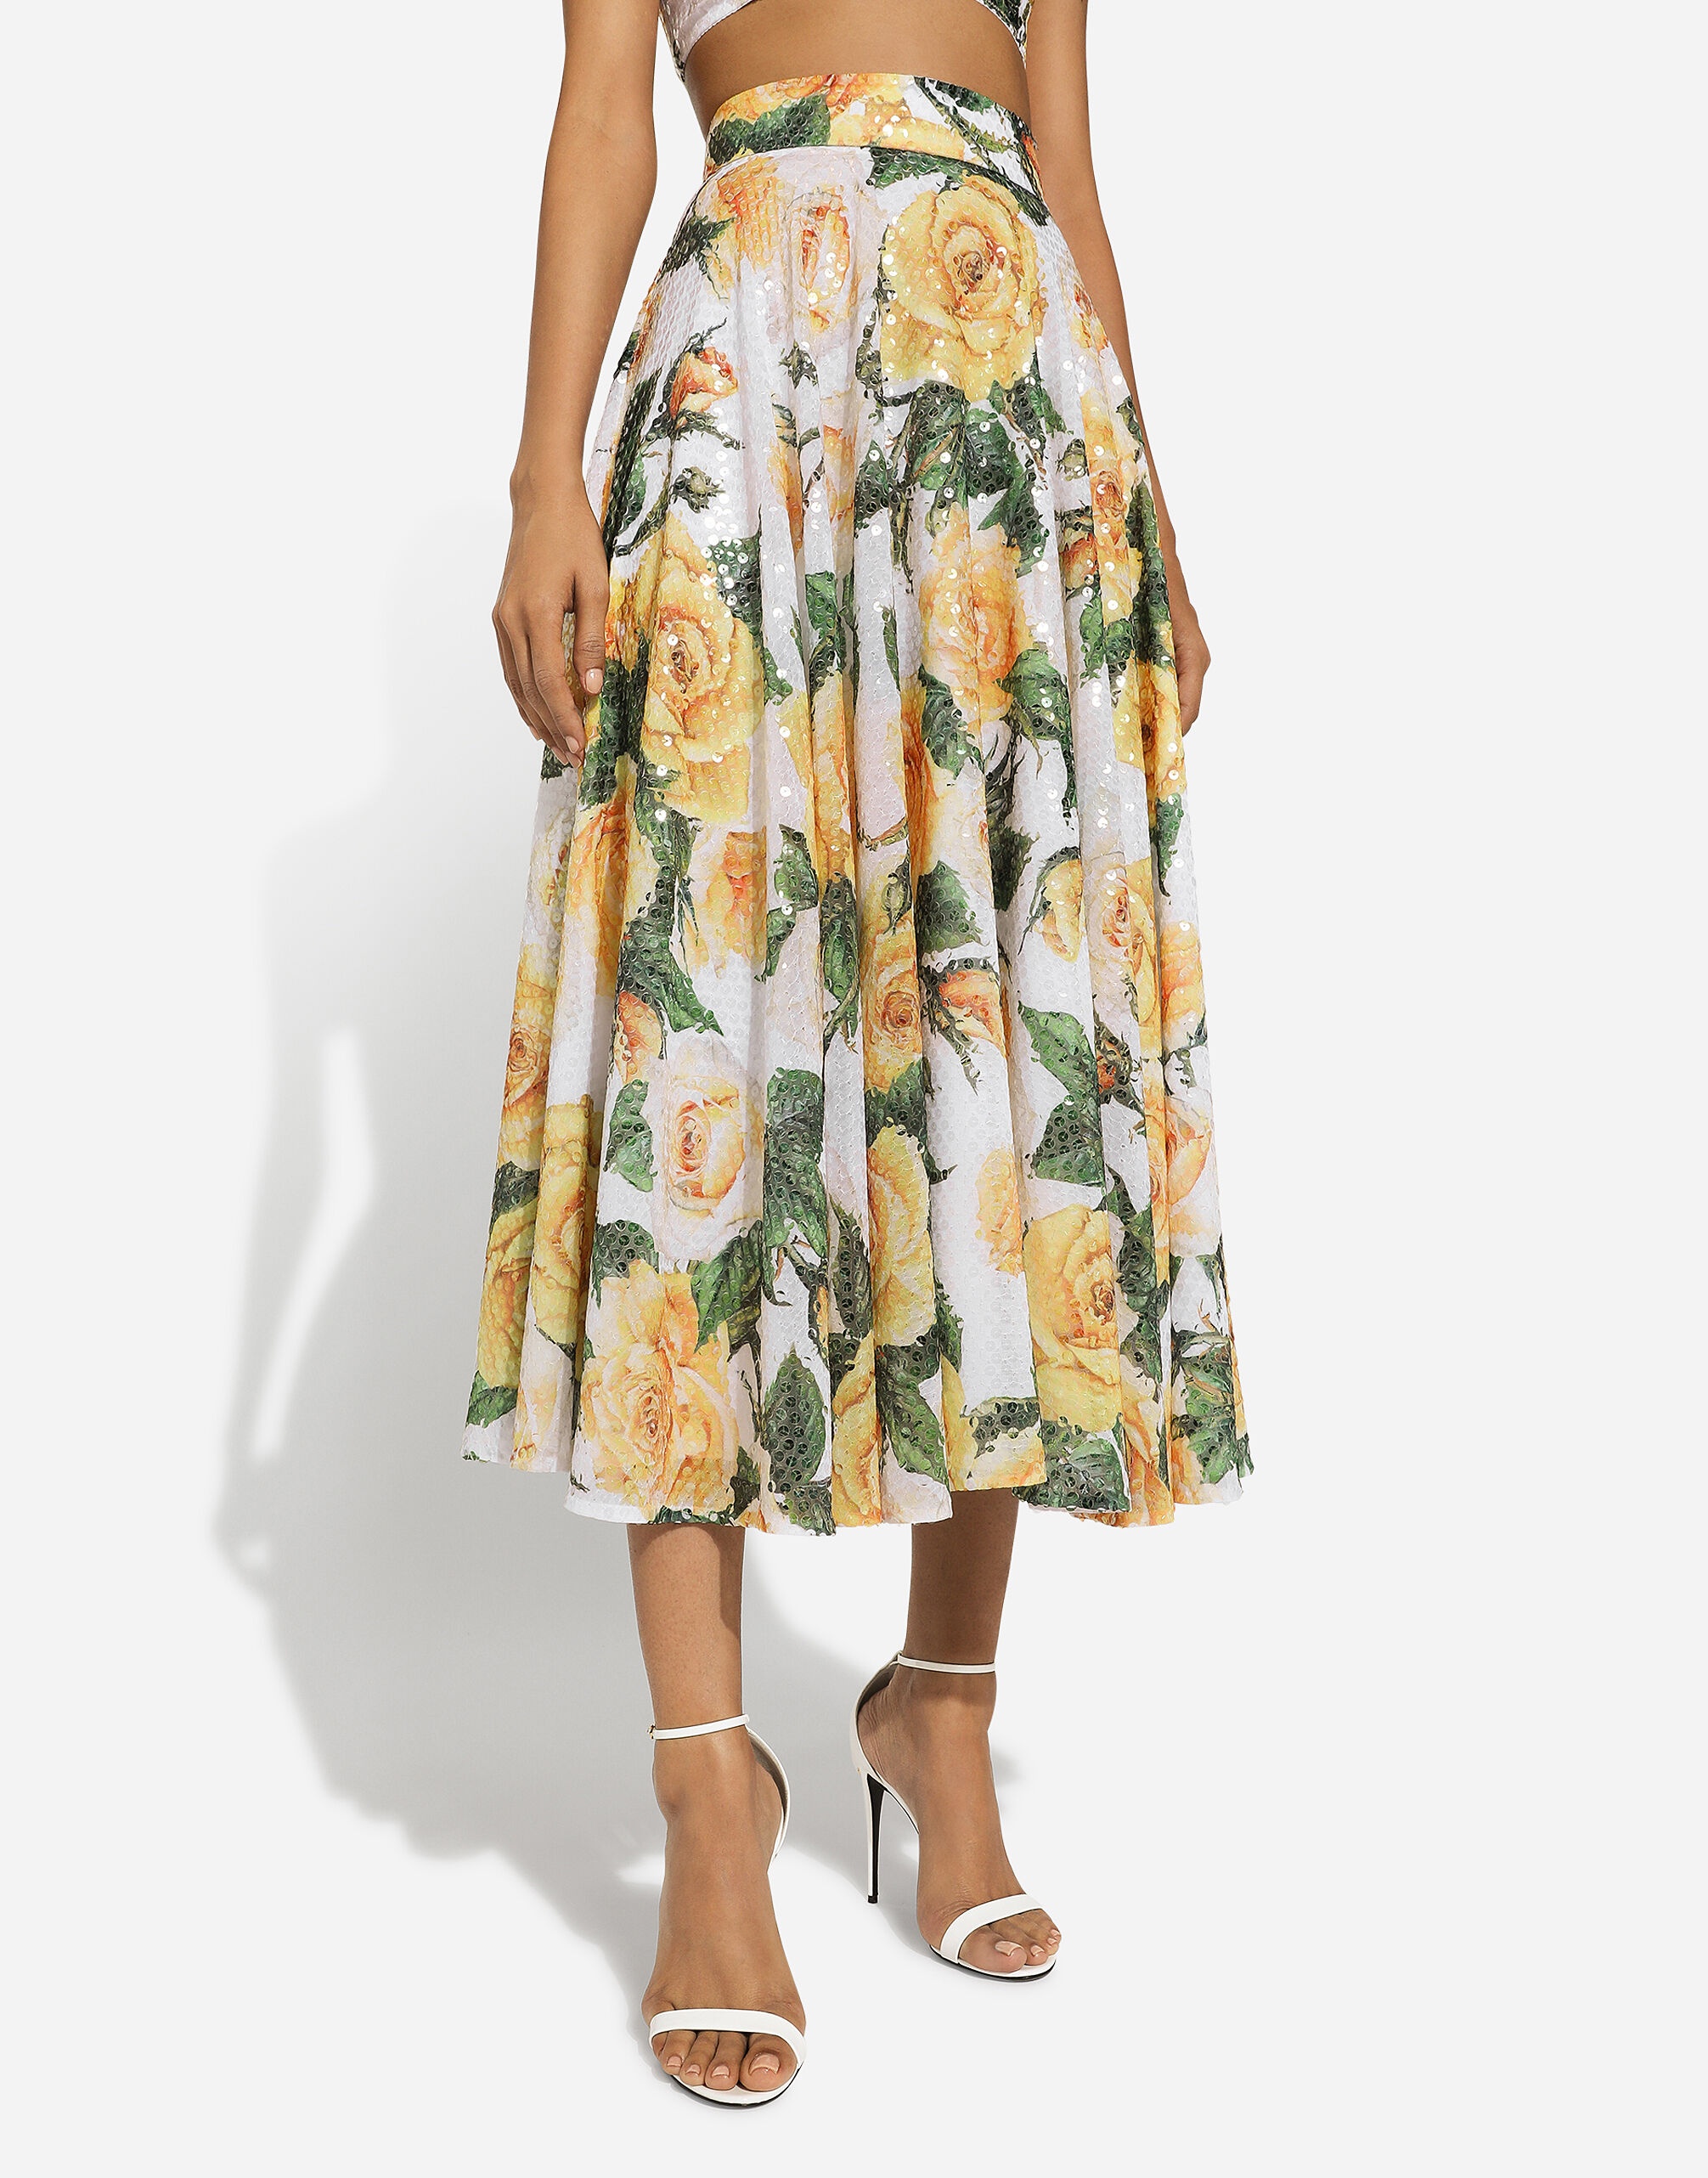 Sequined midi circle skirt with yellow rose print - 4